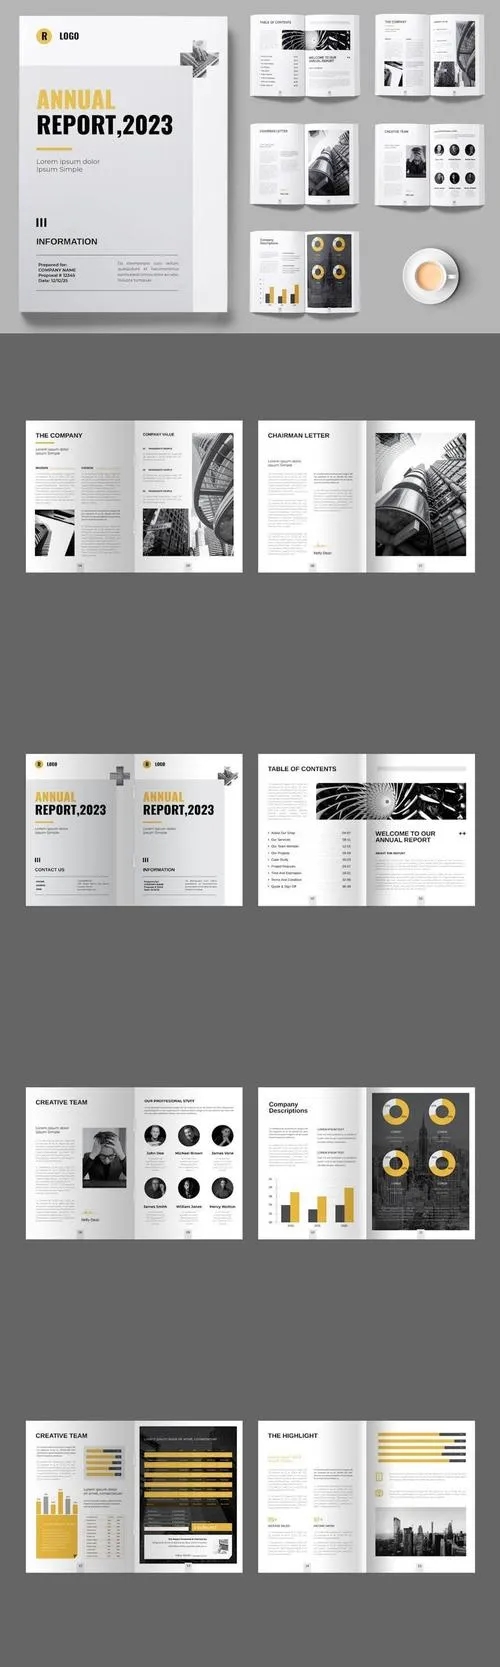 Annual Report 2023 Layout